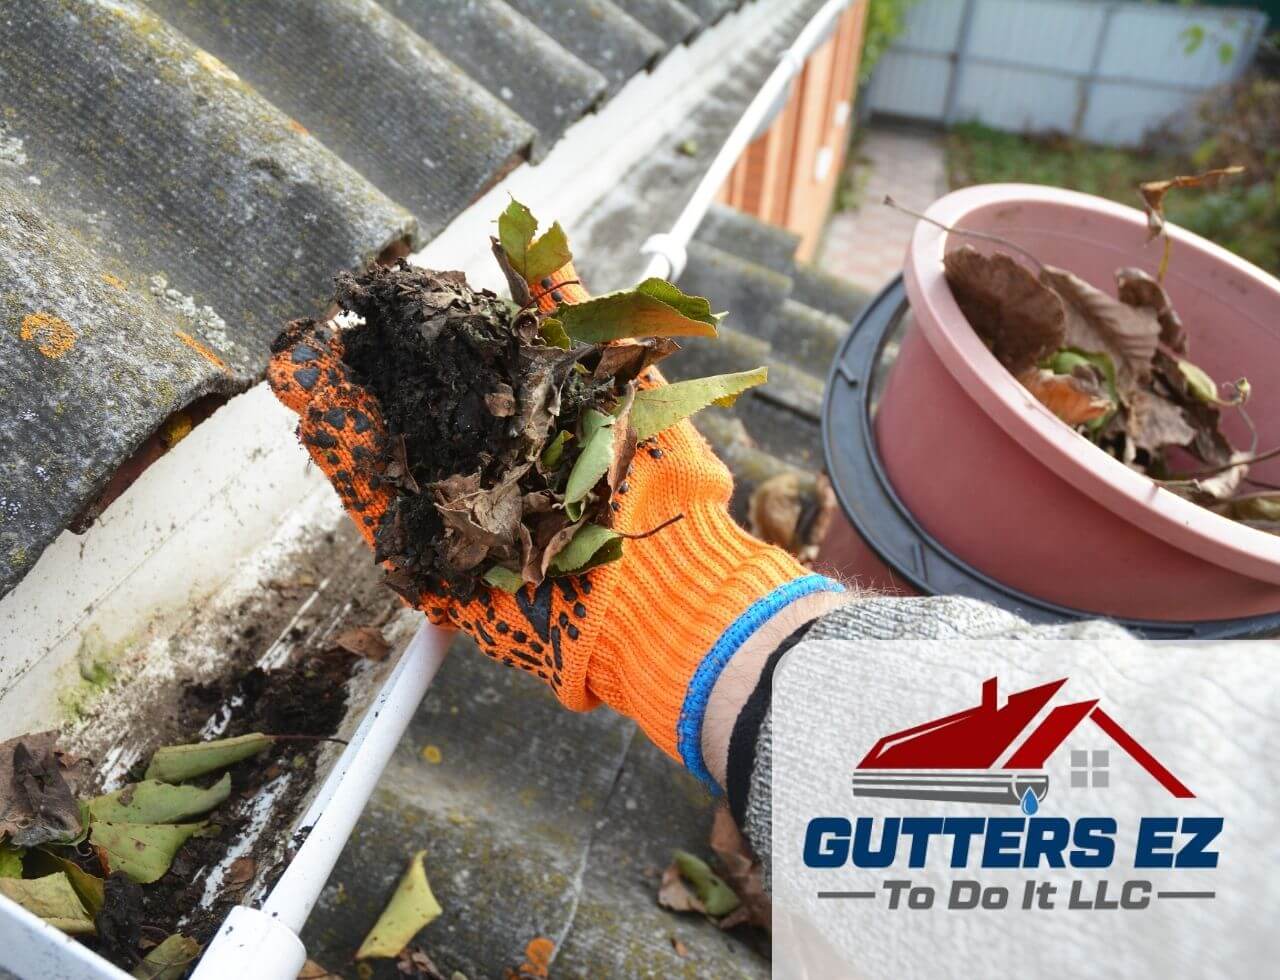 What Happens if you Don't Clean your Gutter